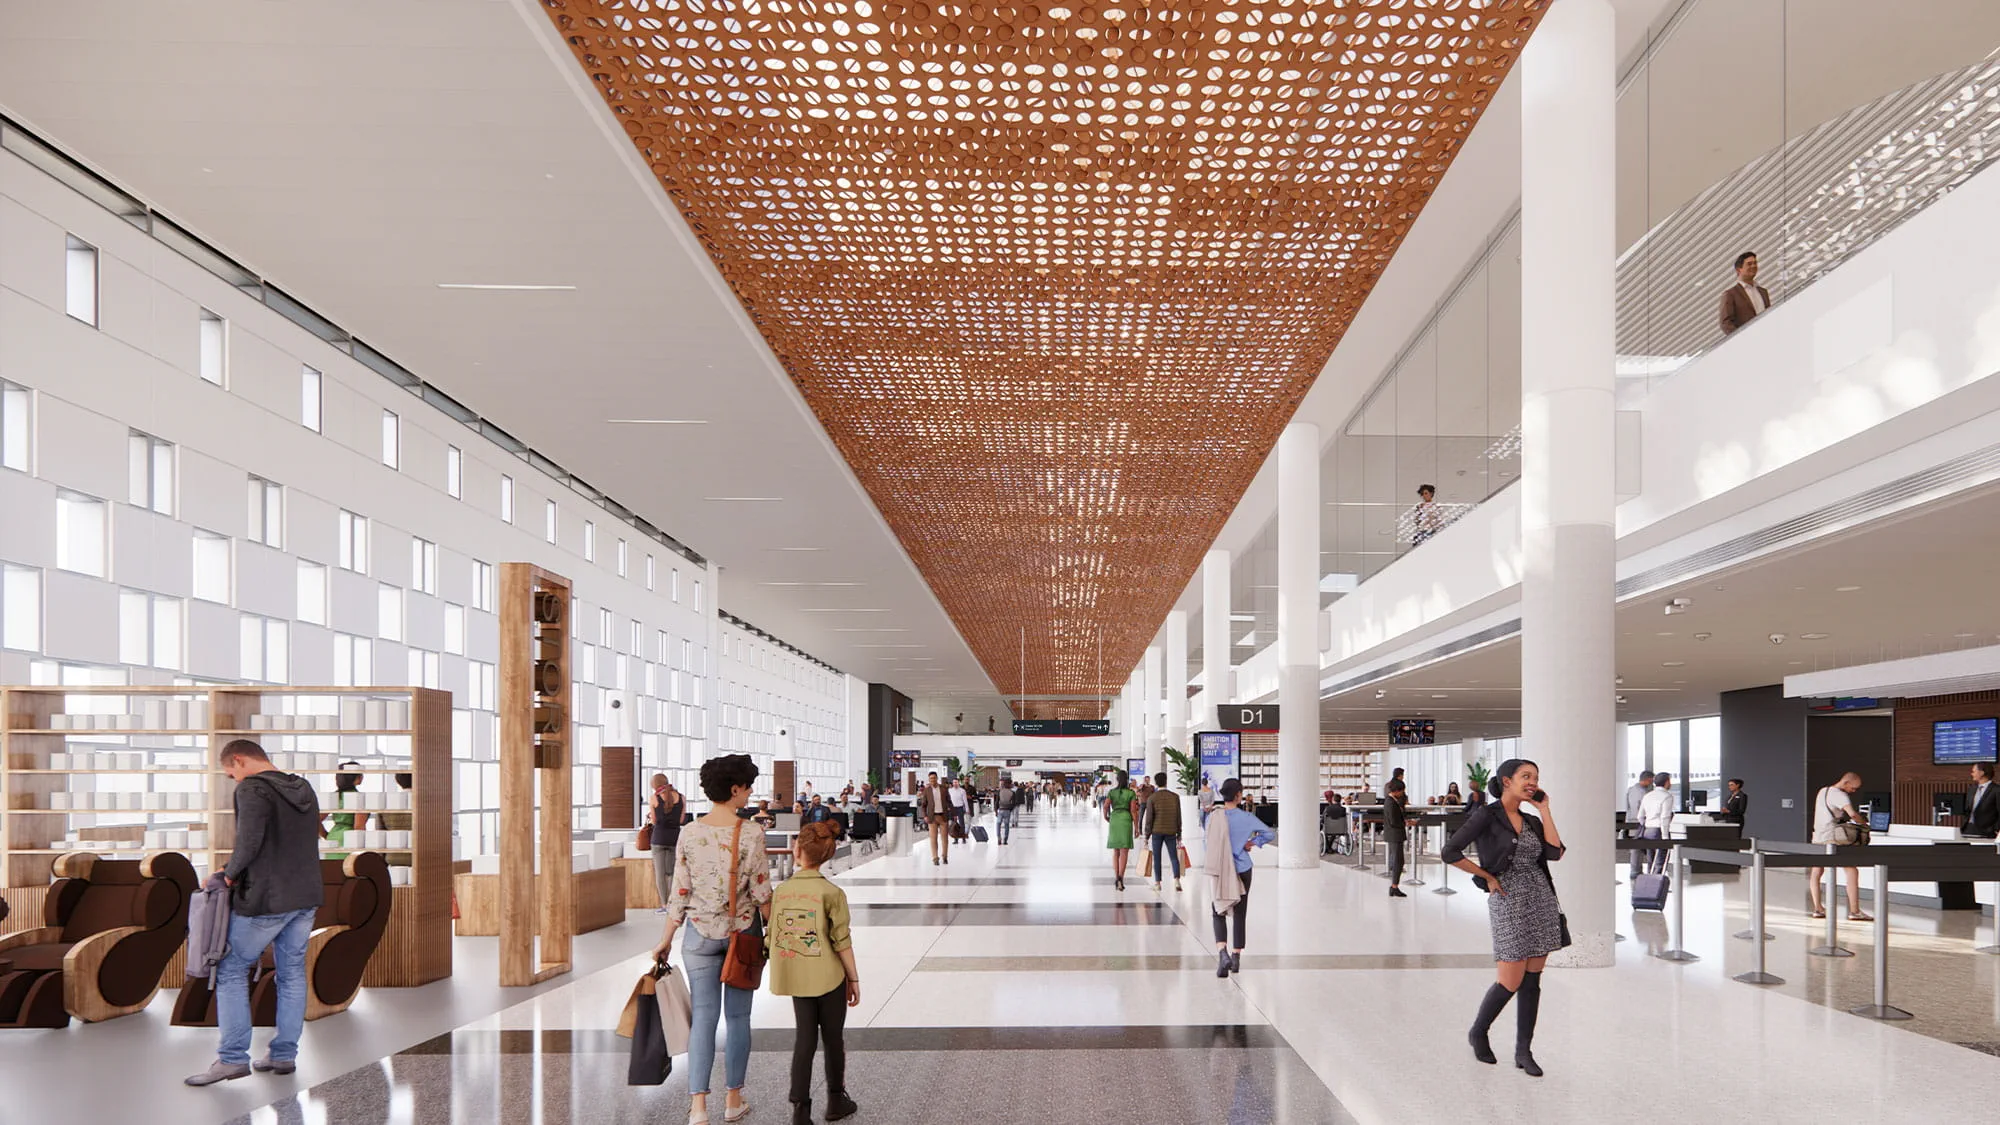 Rendering of interior of airport terminal with shops and people walking through